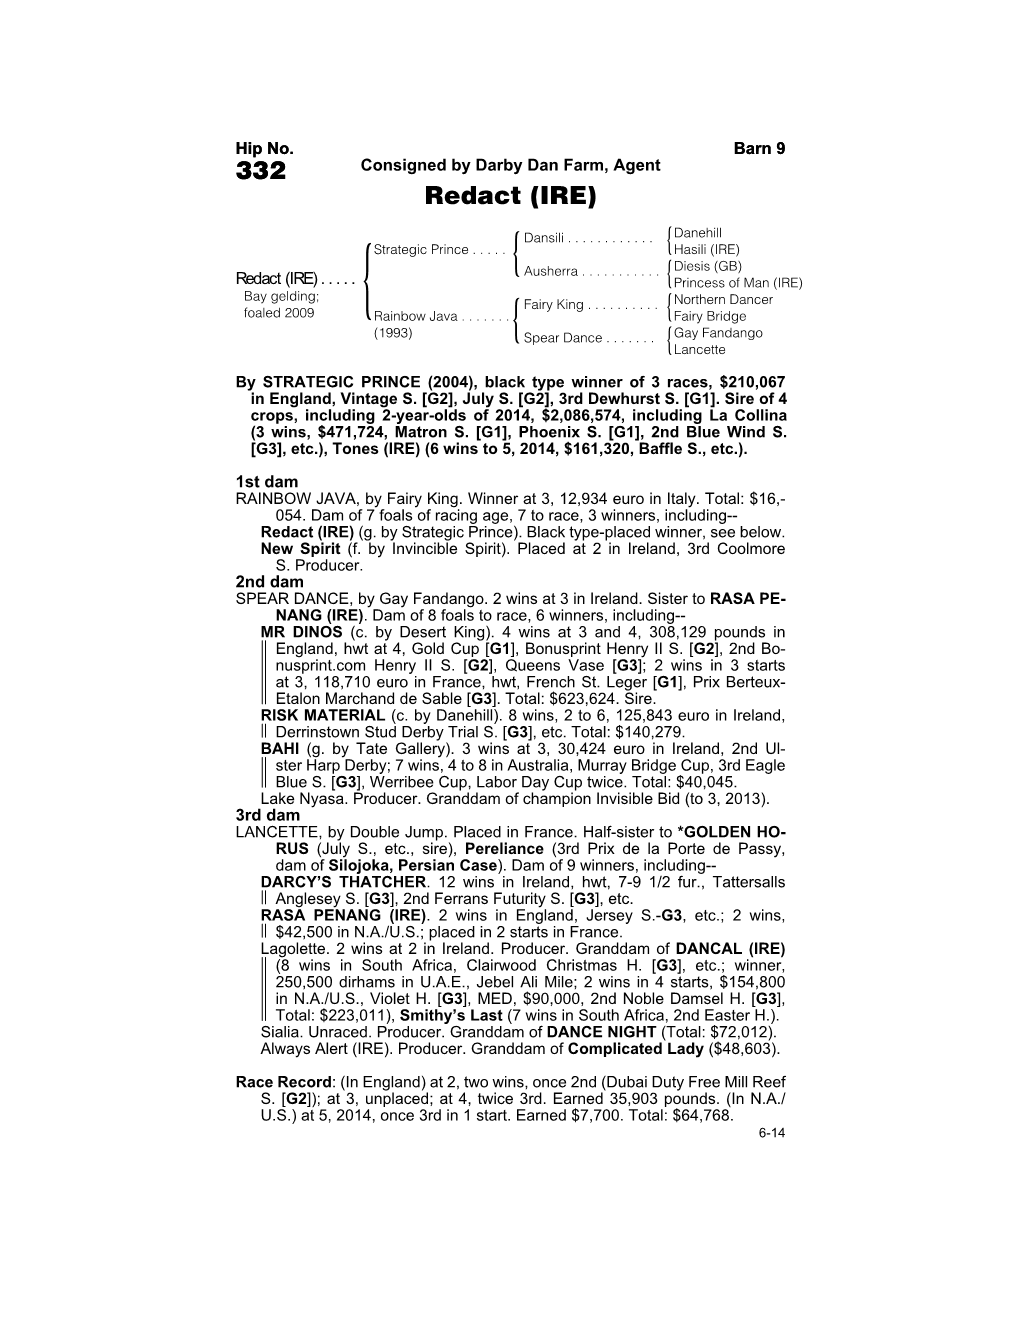 332 Consigned by Darby Dan Farm, Agent Redact (IRE)